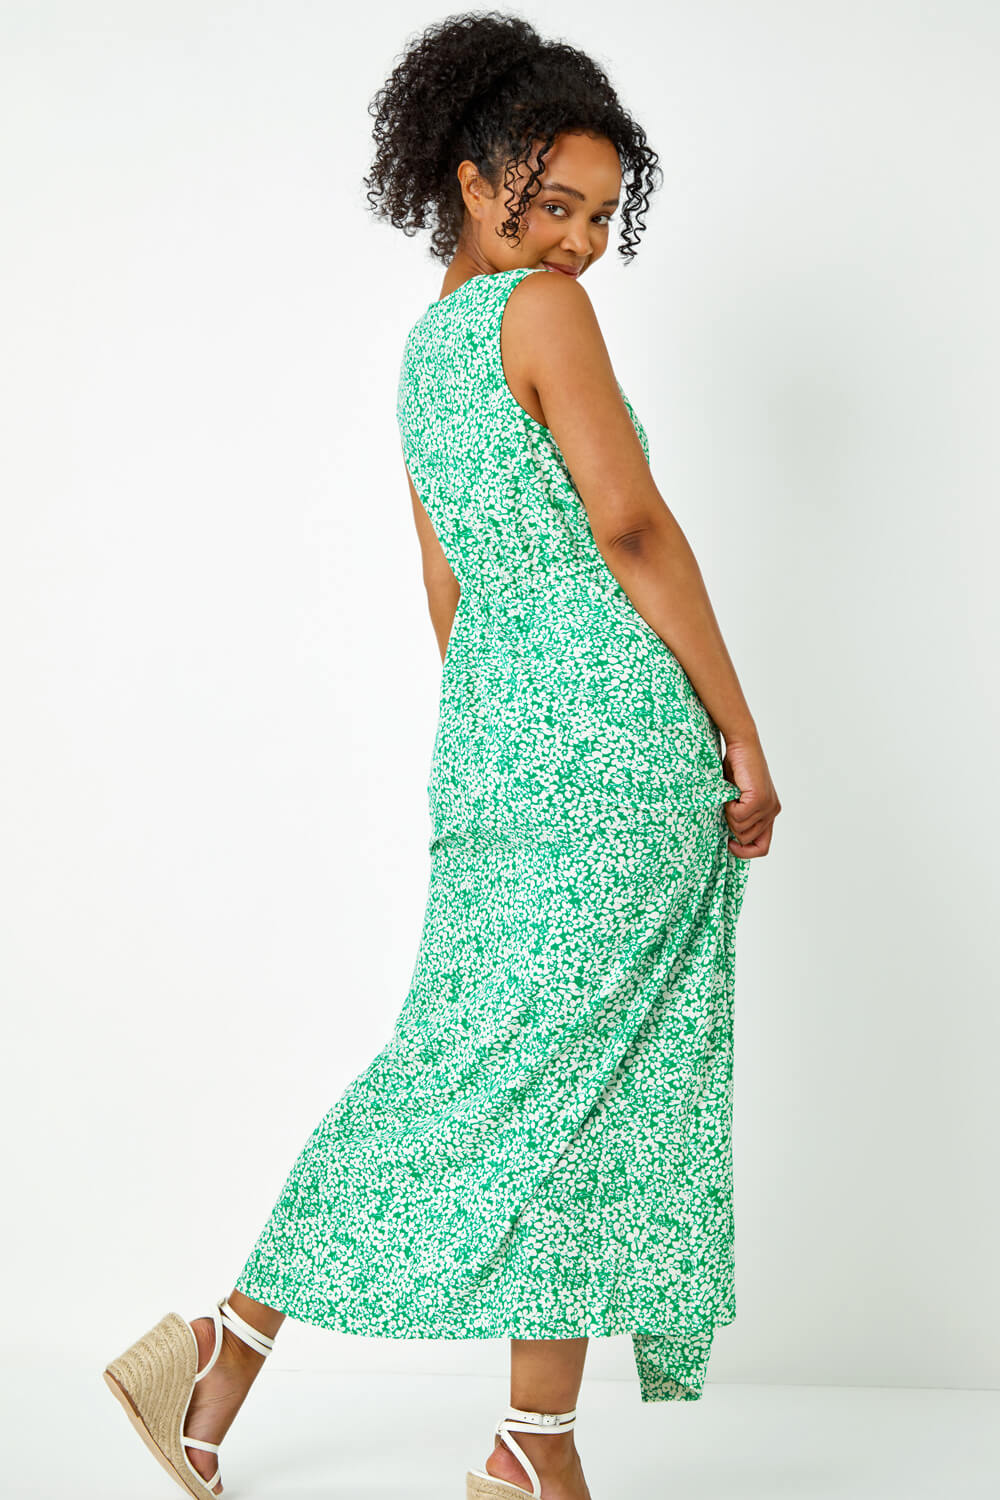 Green Petite Floral Print Stretch Maxi Dress, Image 3 of 5